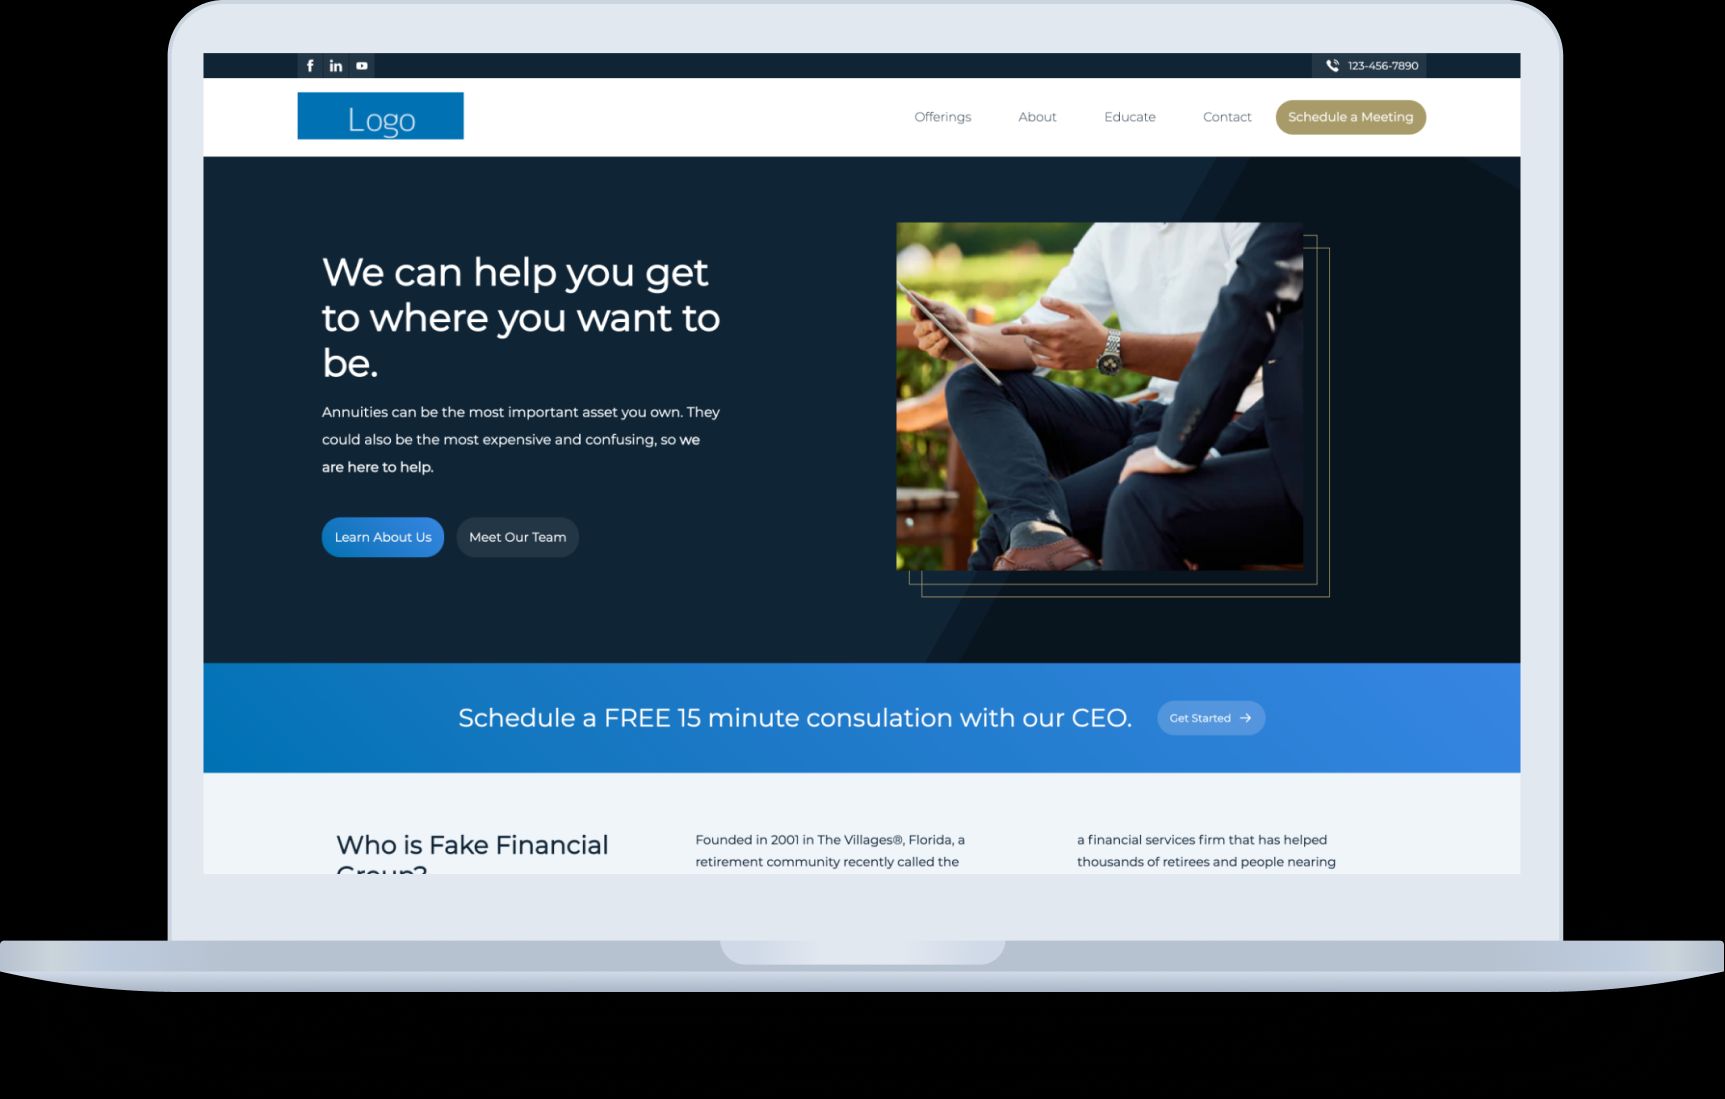 Financial Group Remake homepage, with a navigation menu, call-to-action buttons, and an image of two men talking while sitting on a bench